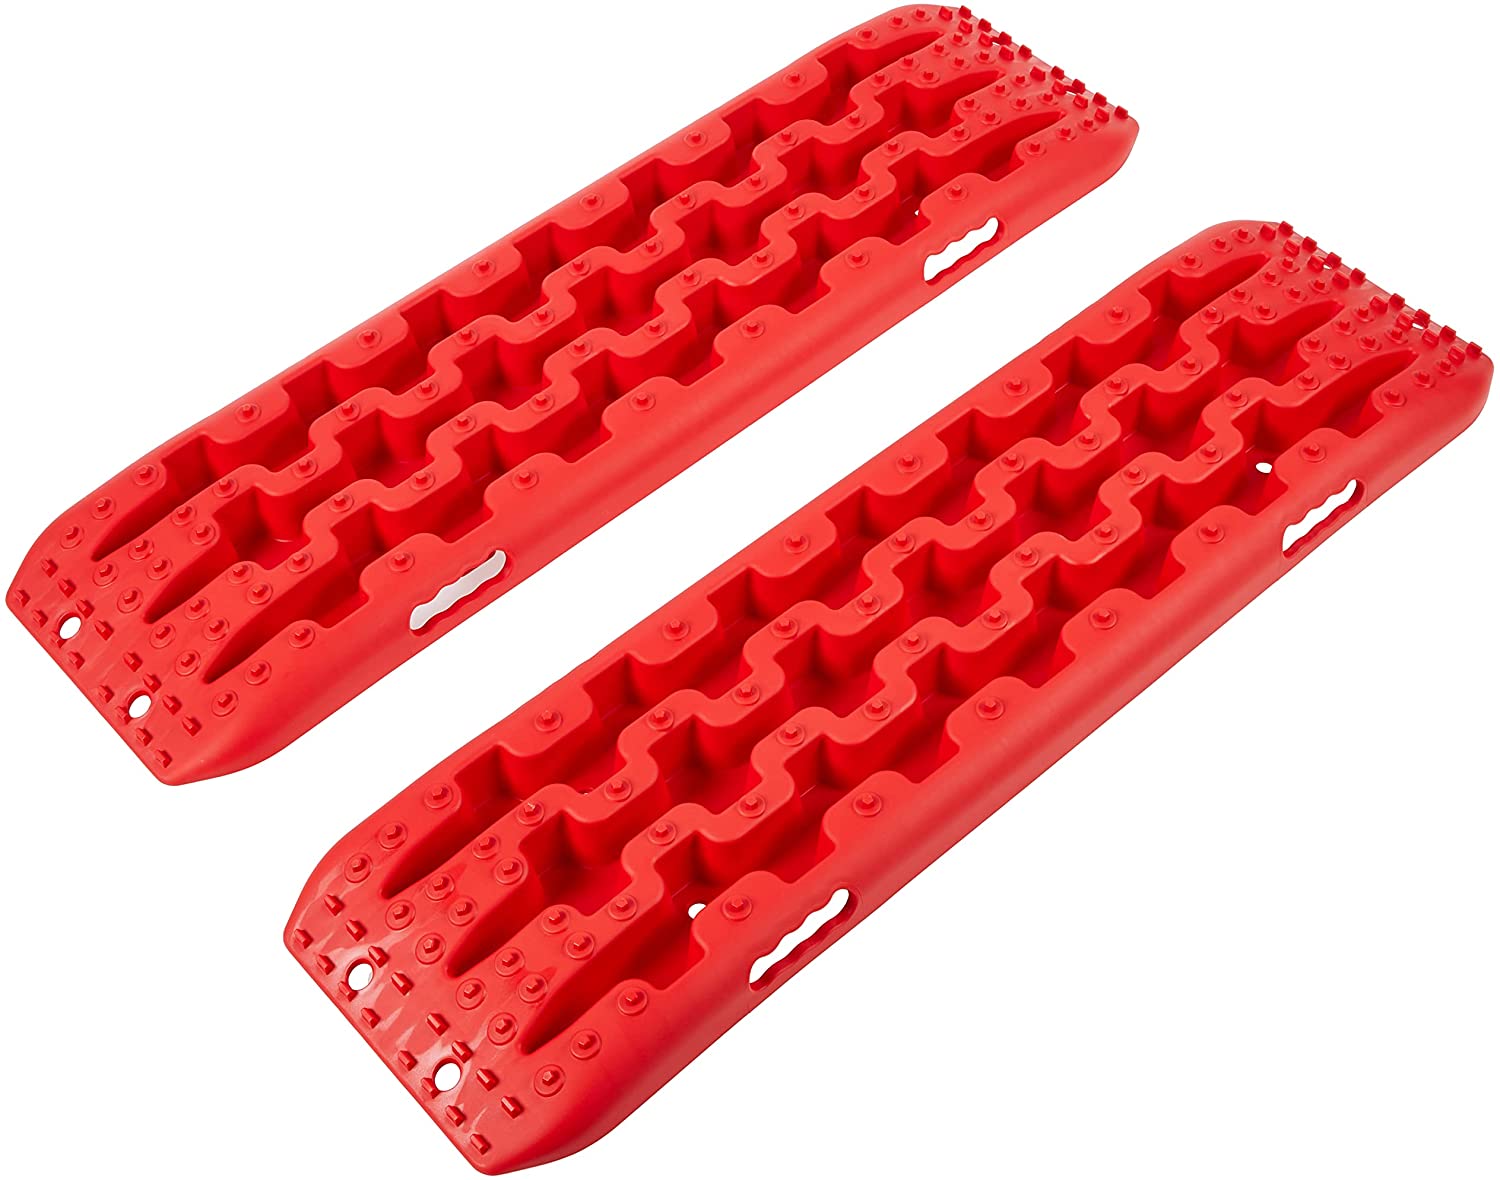  YIYITOOLS Recovery Traction Tracks 2 Piece, Tire Traction Mats  for Off Road Mud Sand Snow, 4WD Tire Ladder Lift Mat for Cars Trucks SUVs  Vehicle Extraction, Red : Automotive